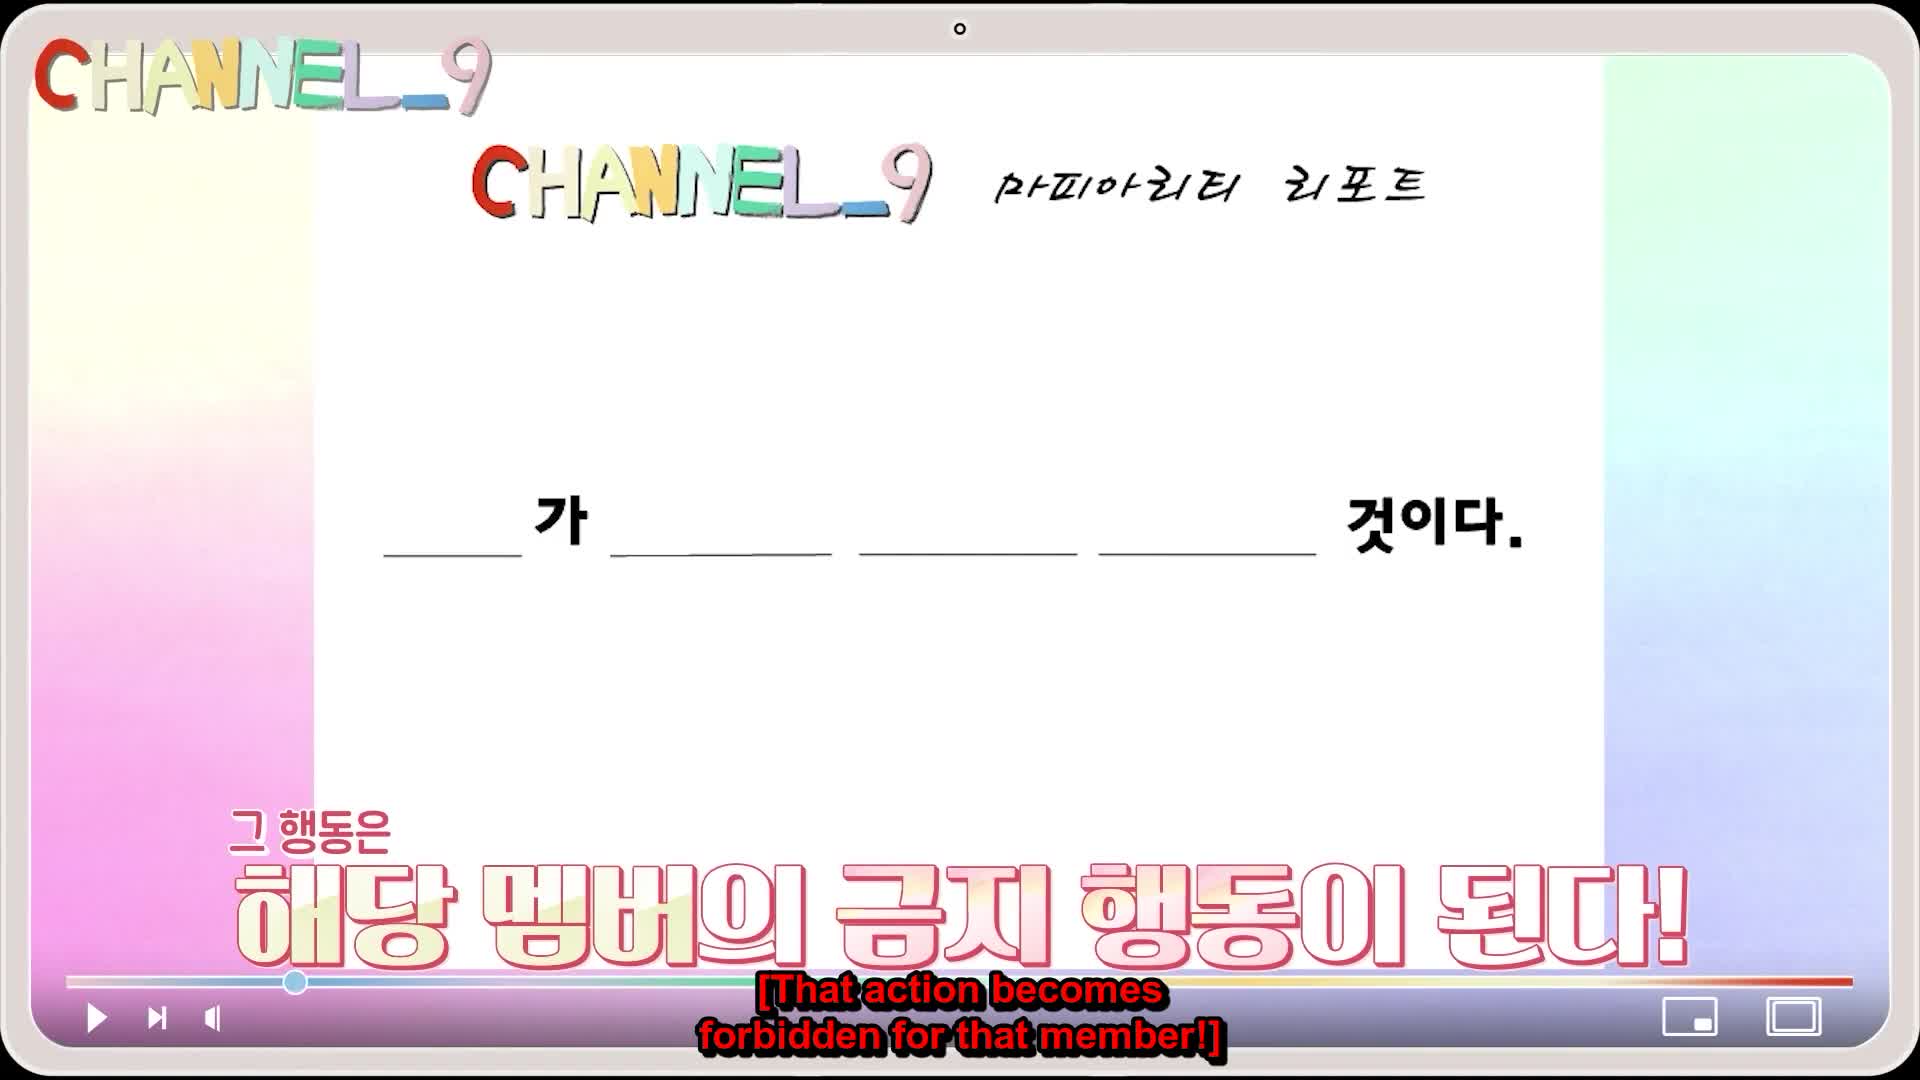 Channel_9 (2018)